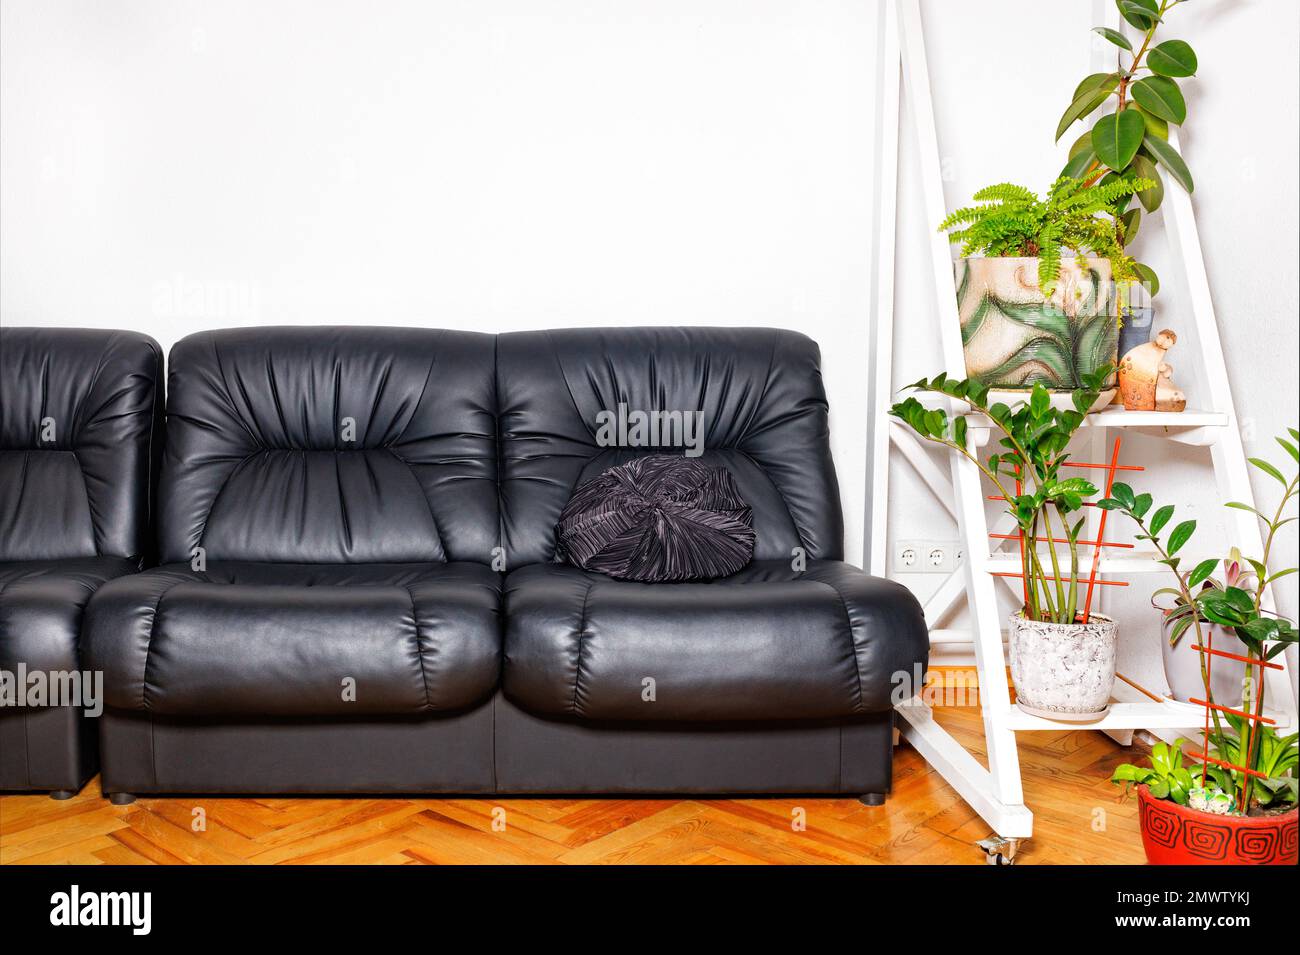 Black leather armchairs in the interior of the rest room of an office space with green flowers against a snow-white wall. Copy space. Stock Photo